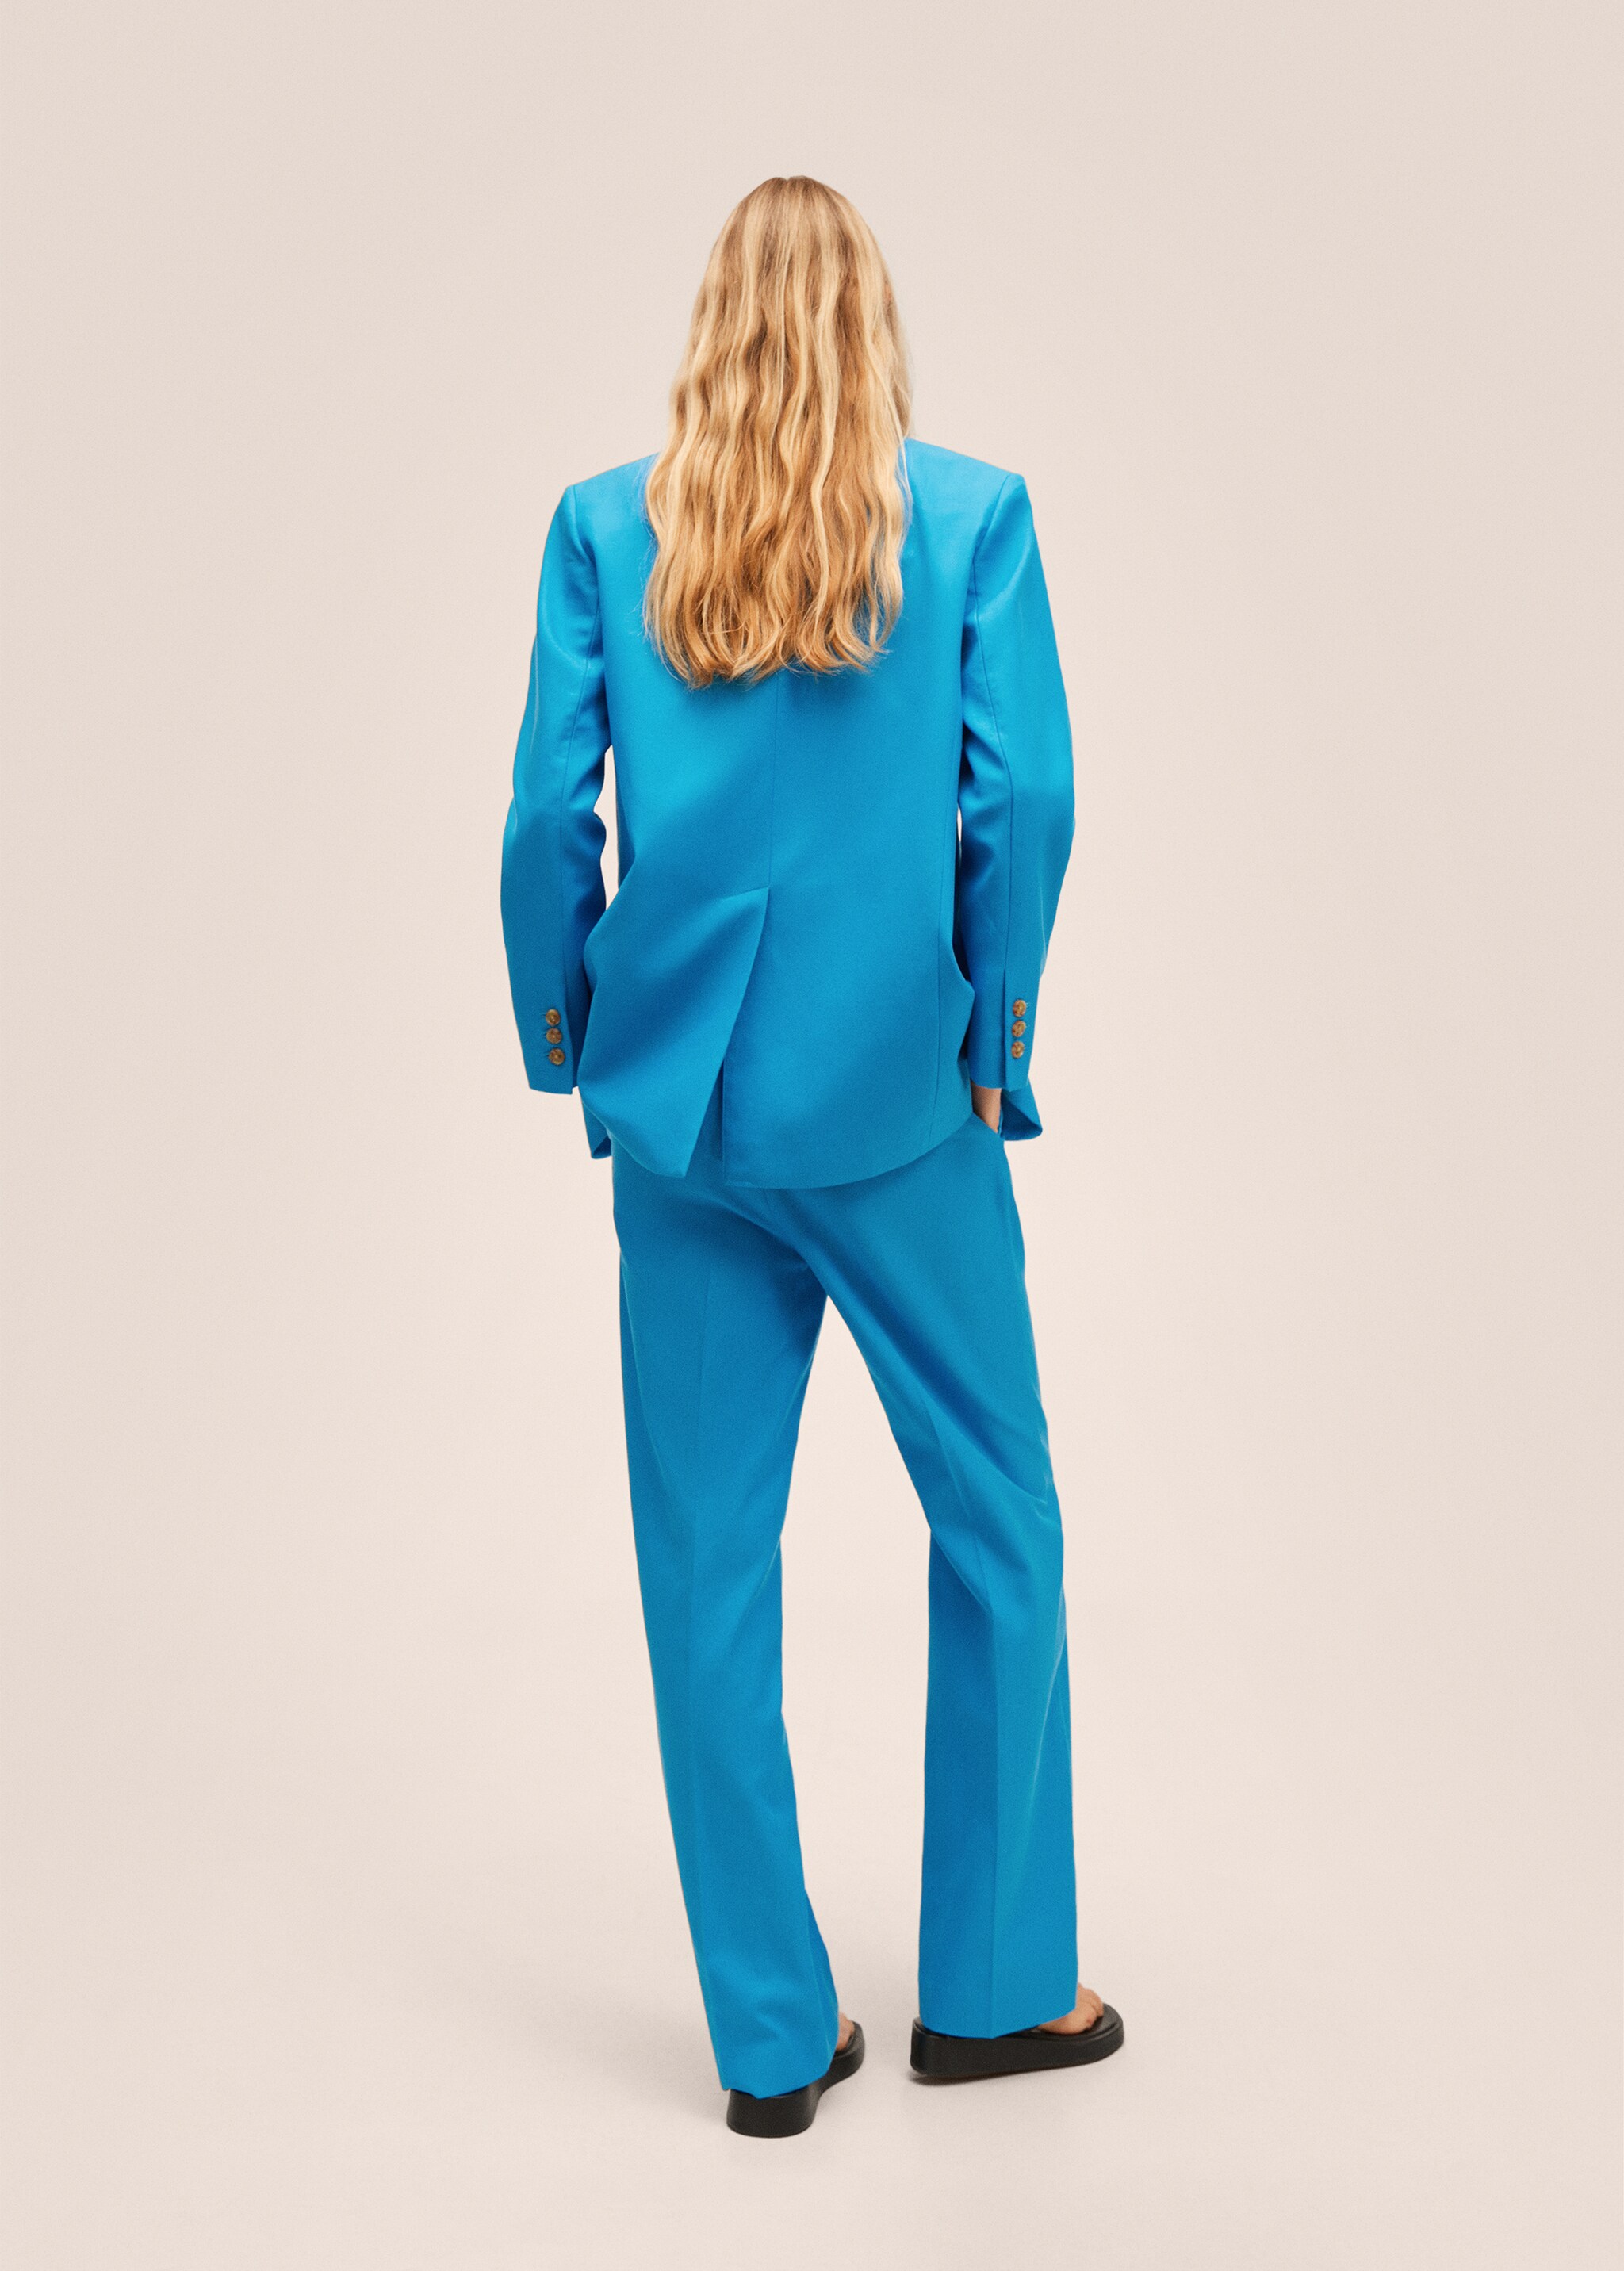 Oversized suit jacket - Reverse of the article